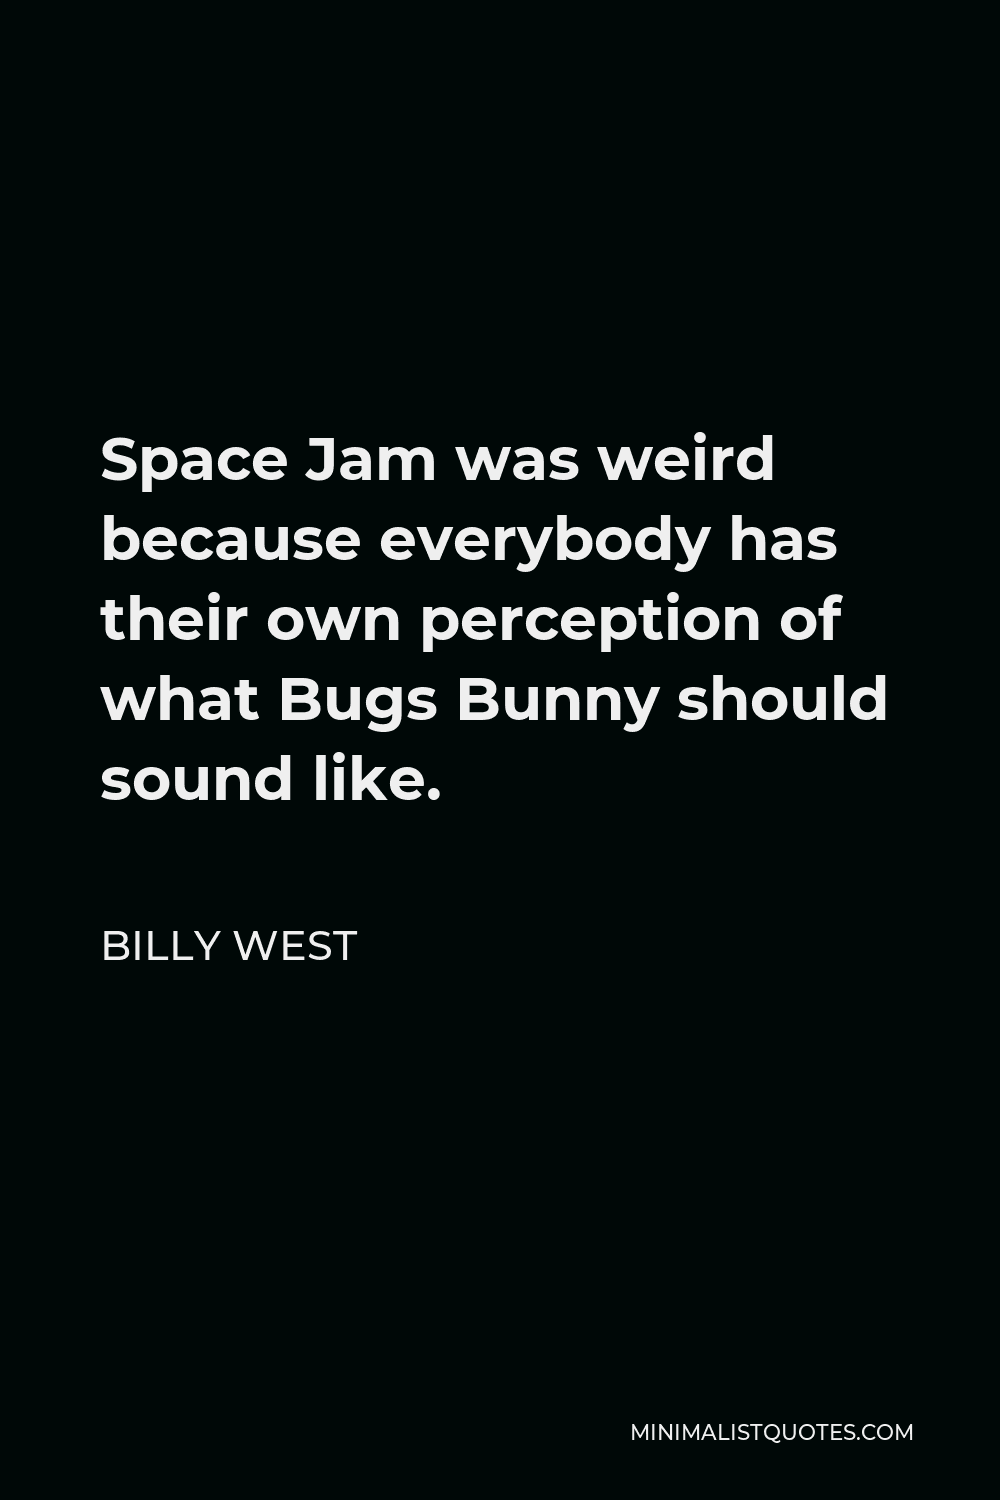 Billy West Quote - Space Jam was weird because everybody has their own perception of what Bugs Bunny should sound like.